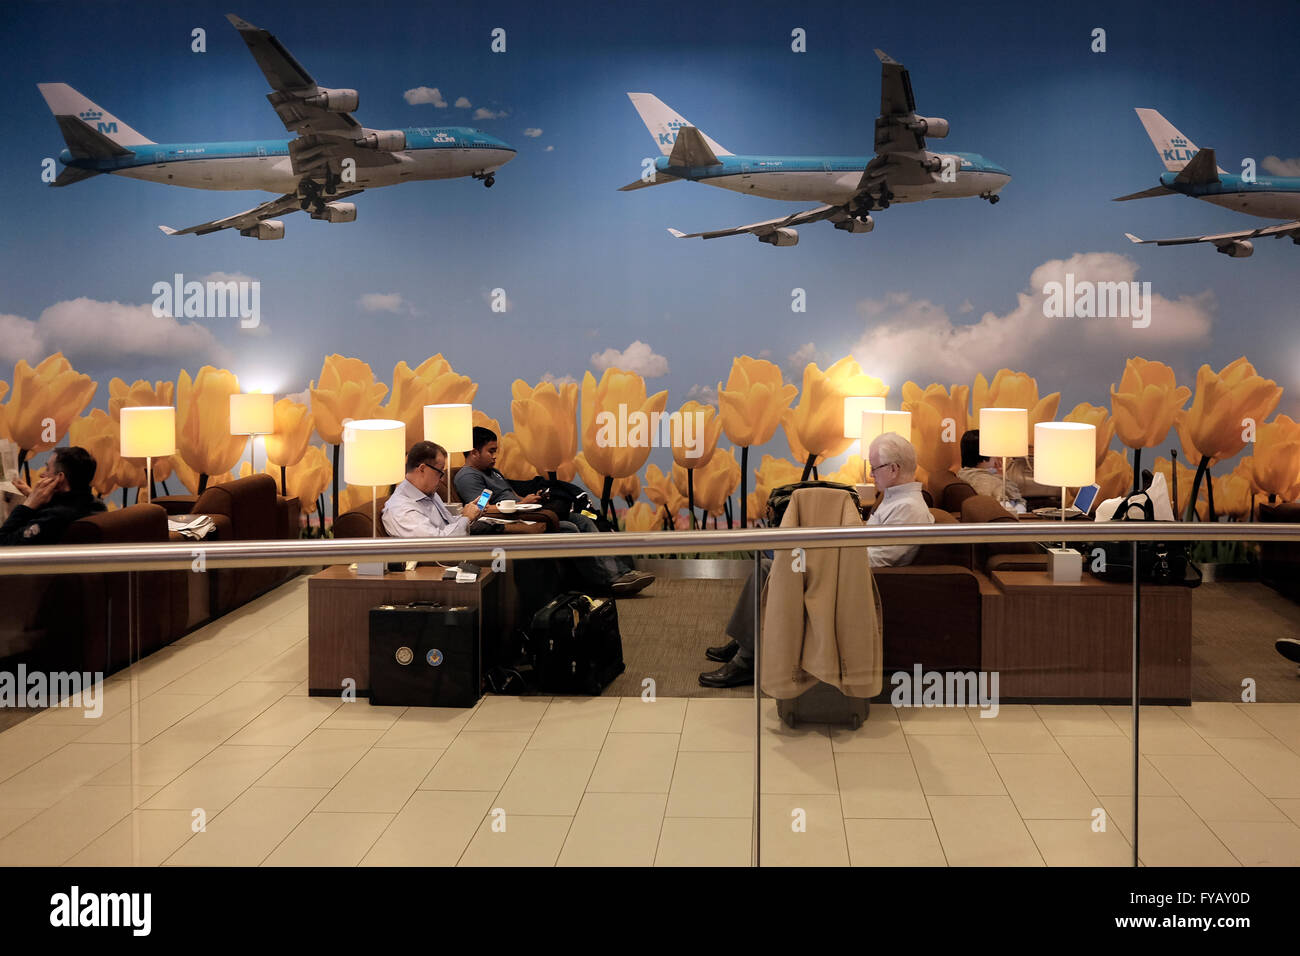 Passengers sitting at the KLM crown business lounge in Schiphol airport in Amsterdam Netherlands Stock Photo